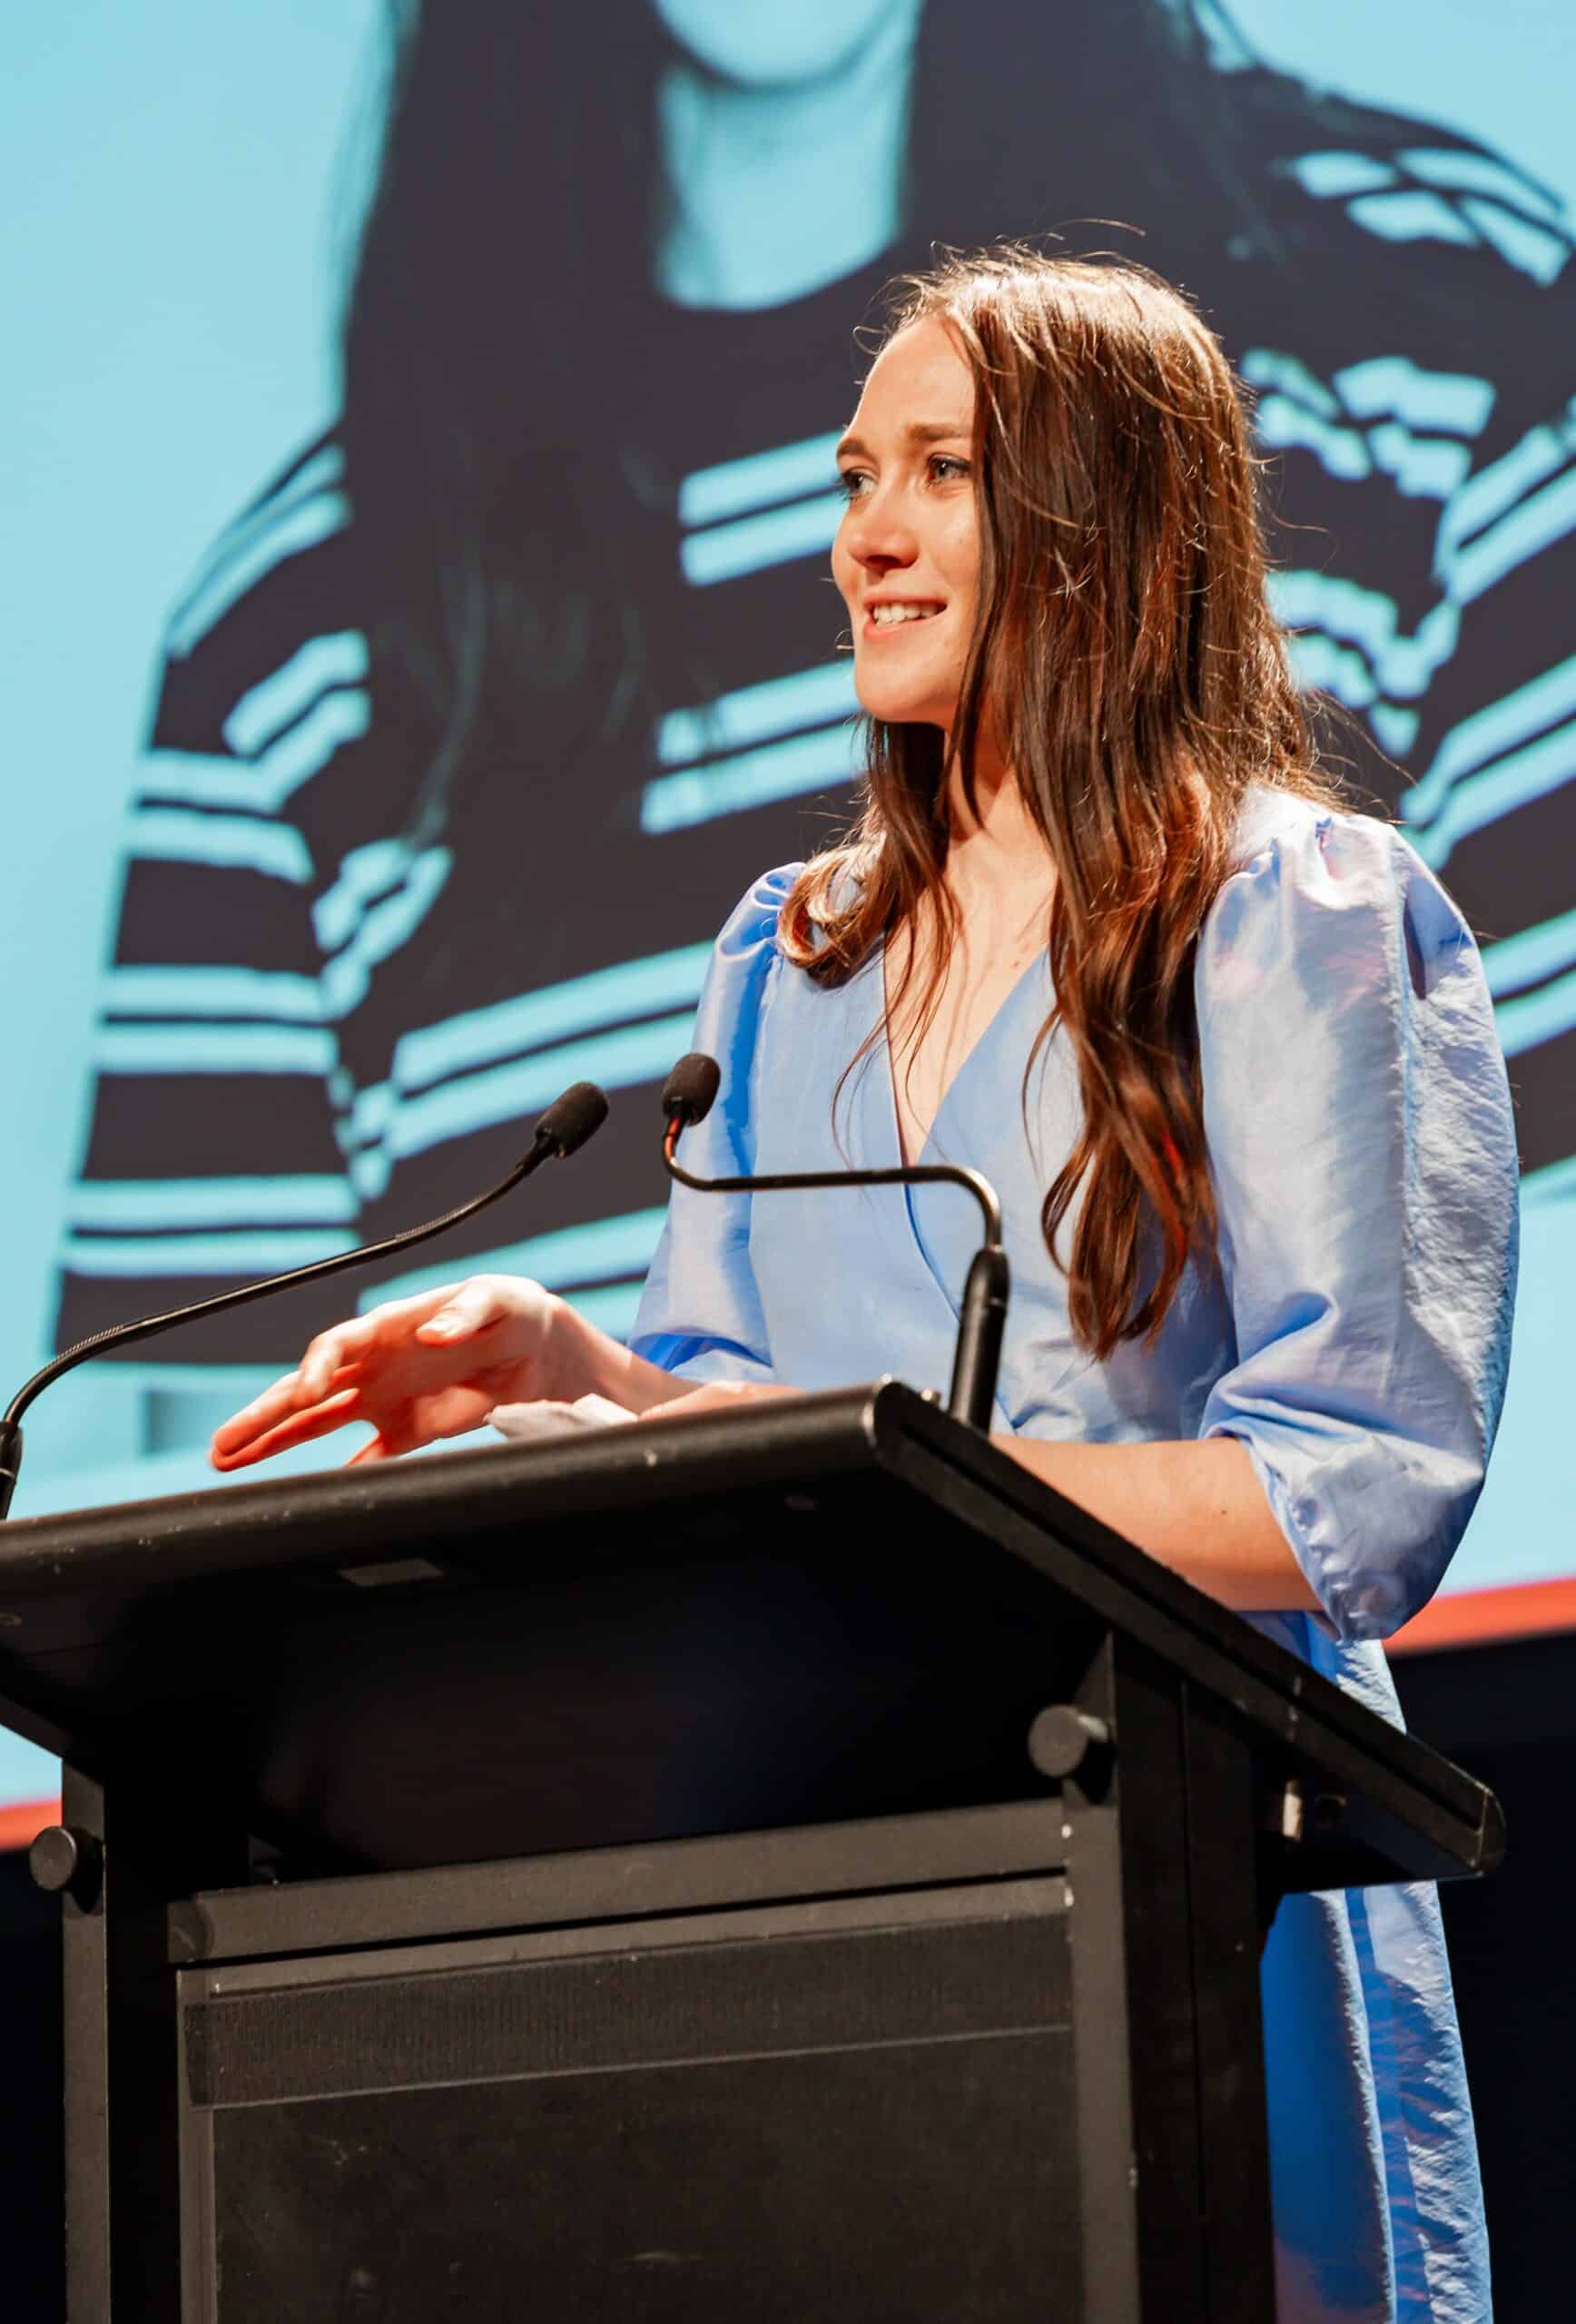 A woman addressing an audience with a speech at a corporate event in Melbourne